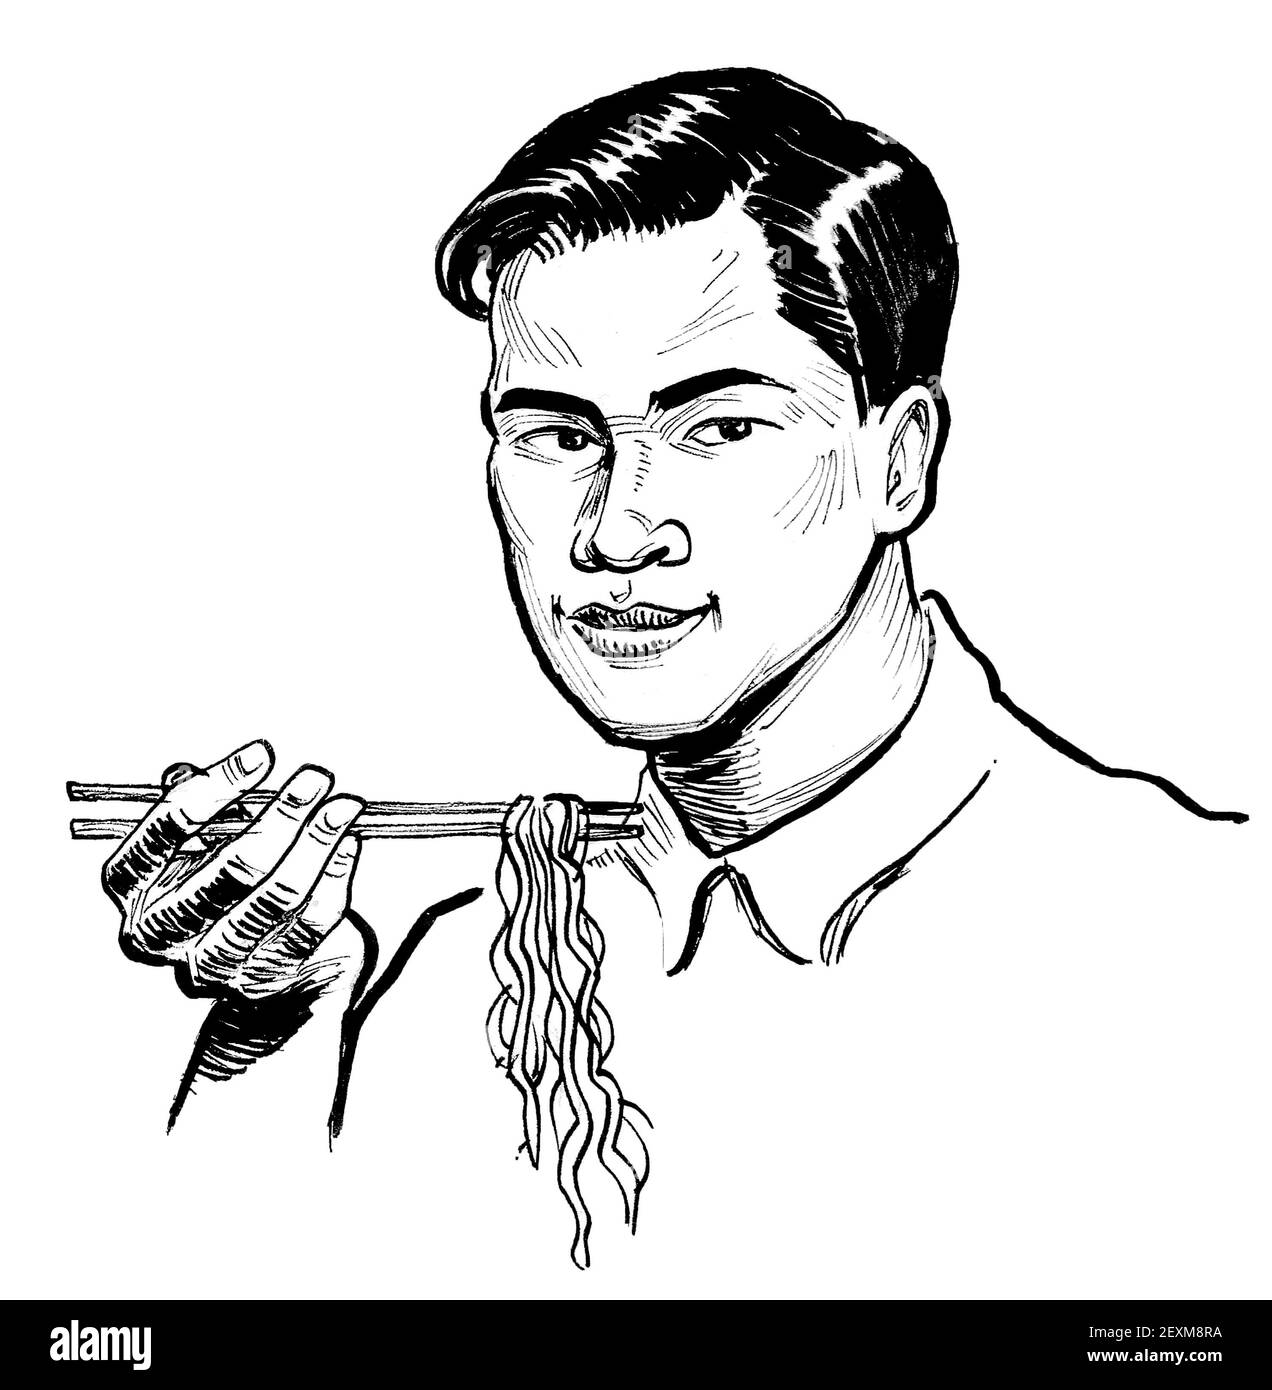 Asian man eating noodles with a chopsticks. Ink black and white drawing Stock Photo